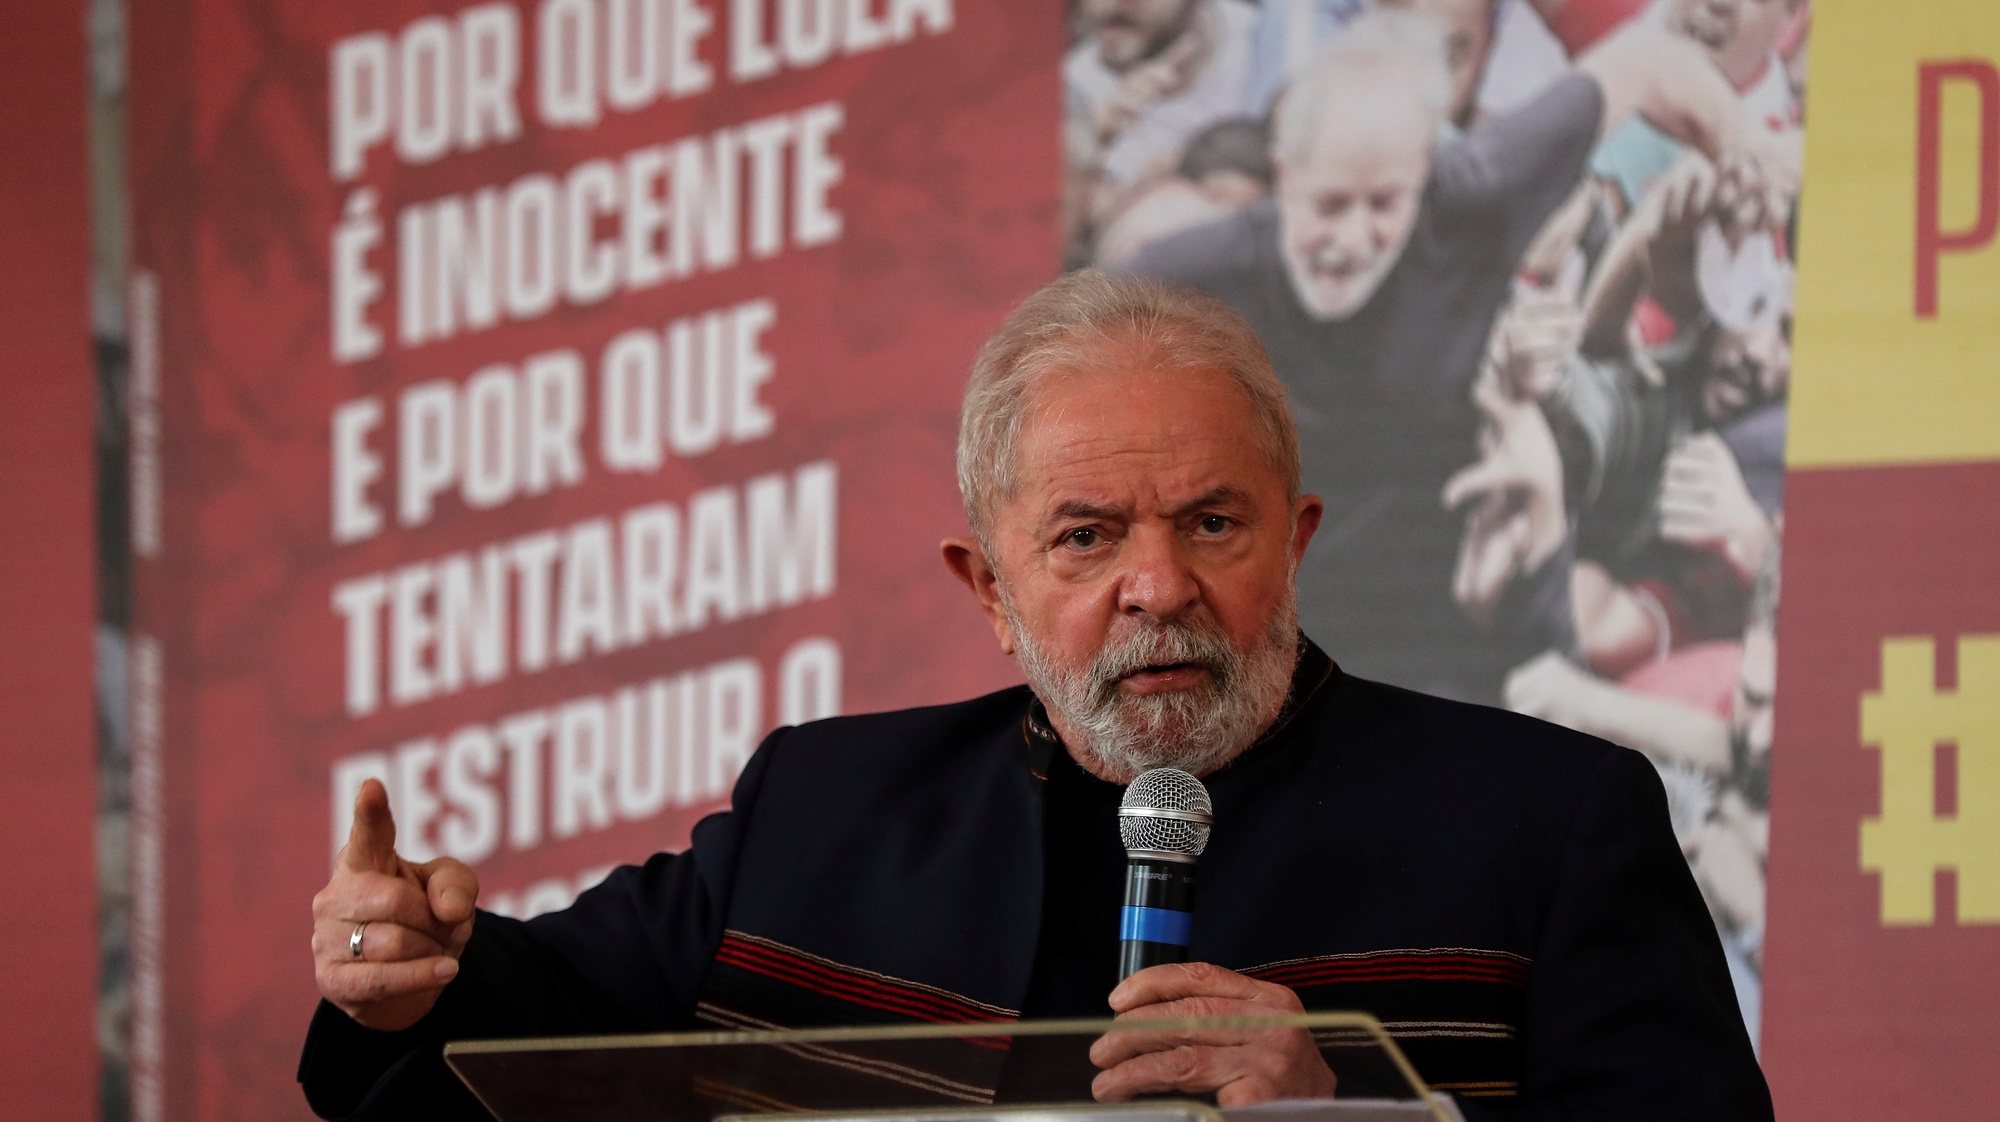 epa09411302 Former Brazilian President Luiz Inacio Lula da Silva speaks during the presentation of a book on his judicial process, in Sao Paulo, Brazil, 12 August 2021. In the book, titled &#039;Memorial of the Truth&#039; Lula details first-hand the trials he faced during the case known as Operation Lava Jato.  EPA/Sebastiao Moreira